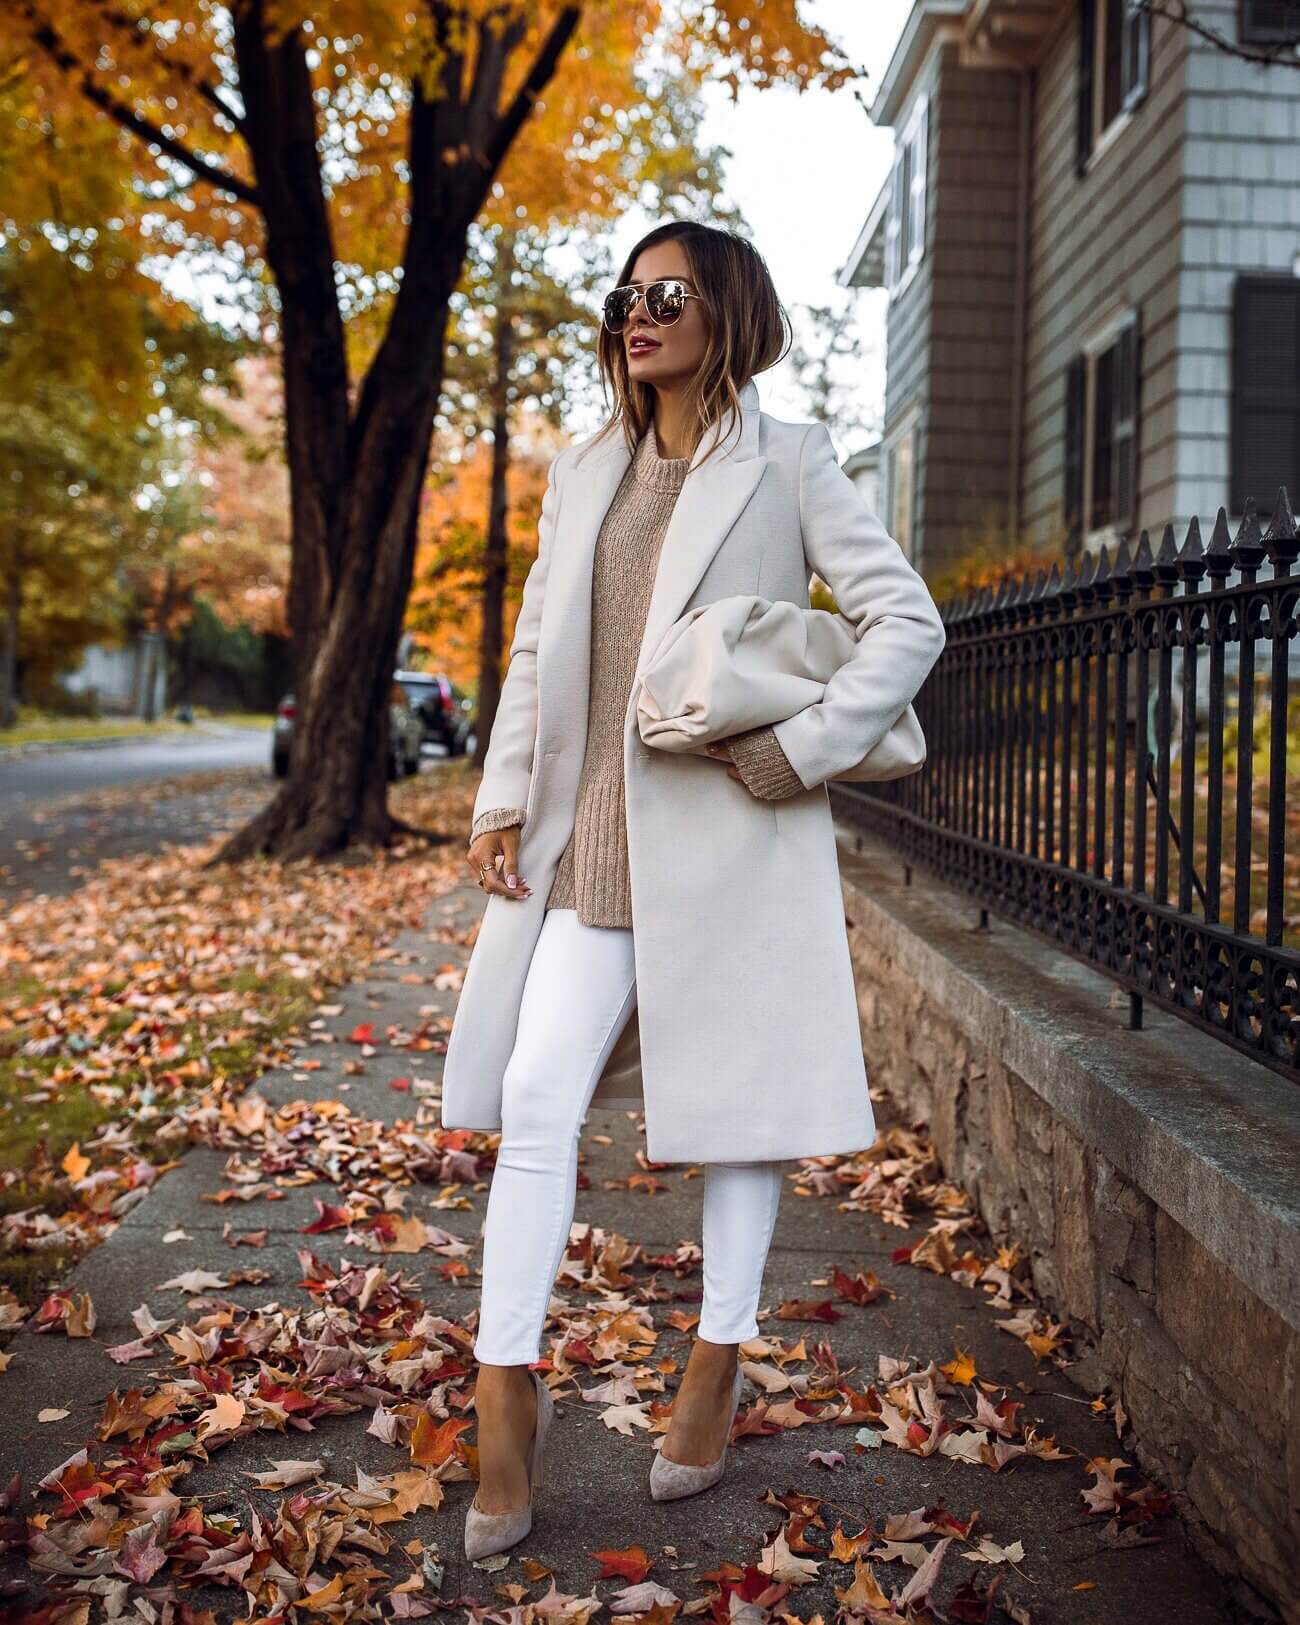 All white winter look: Ready for the mountains - Meet Miri